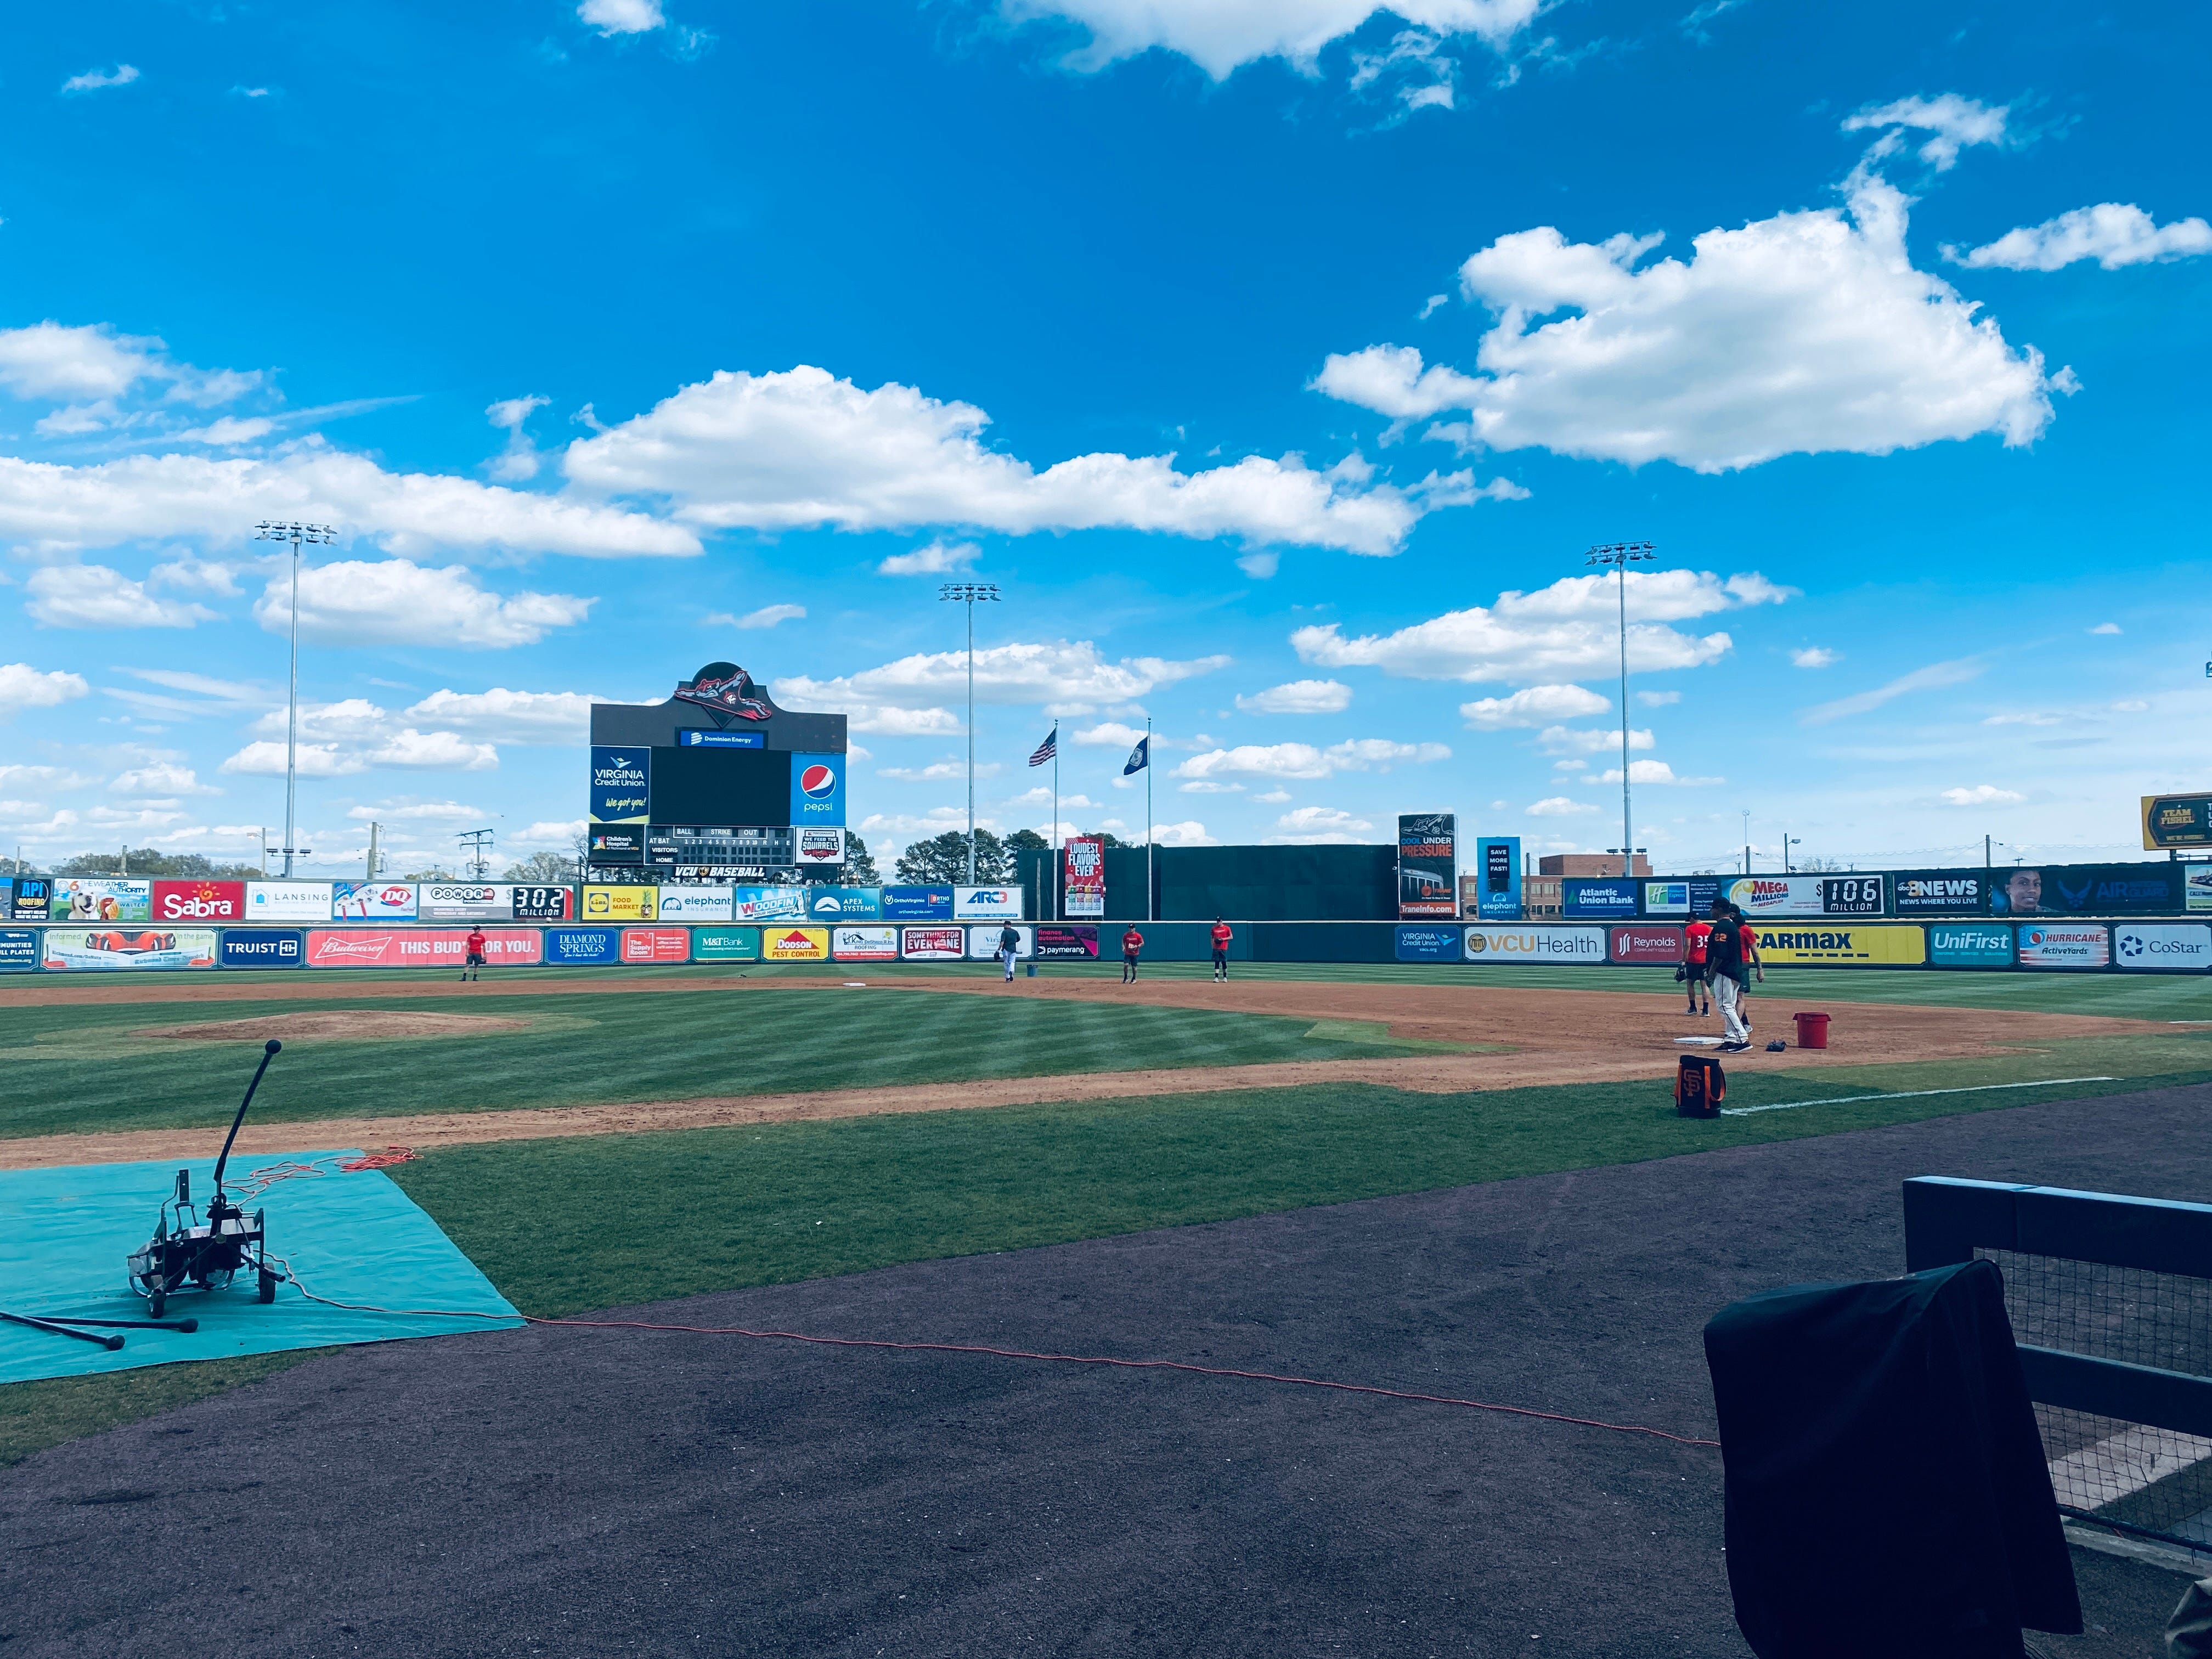 Play ball: Reno Aces pitch a change-up for 2022 season